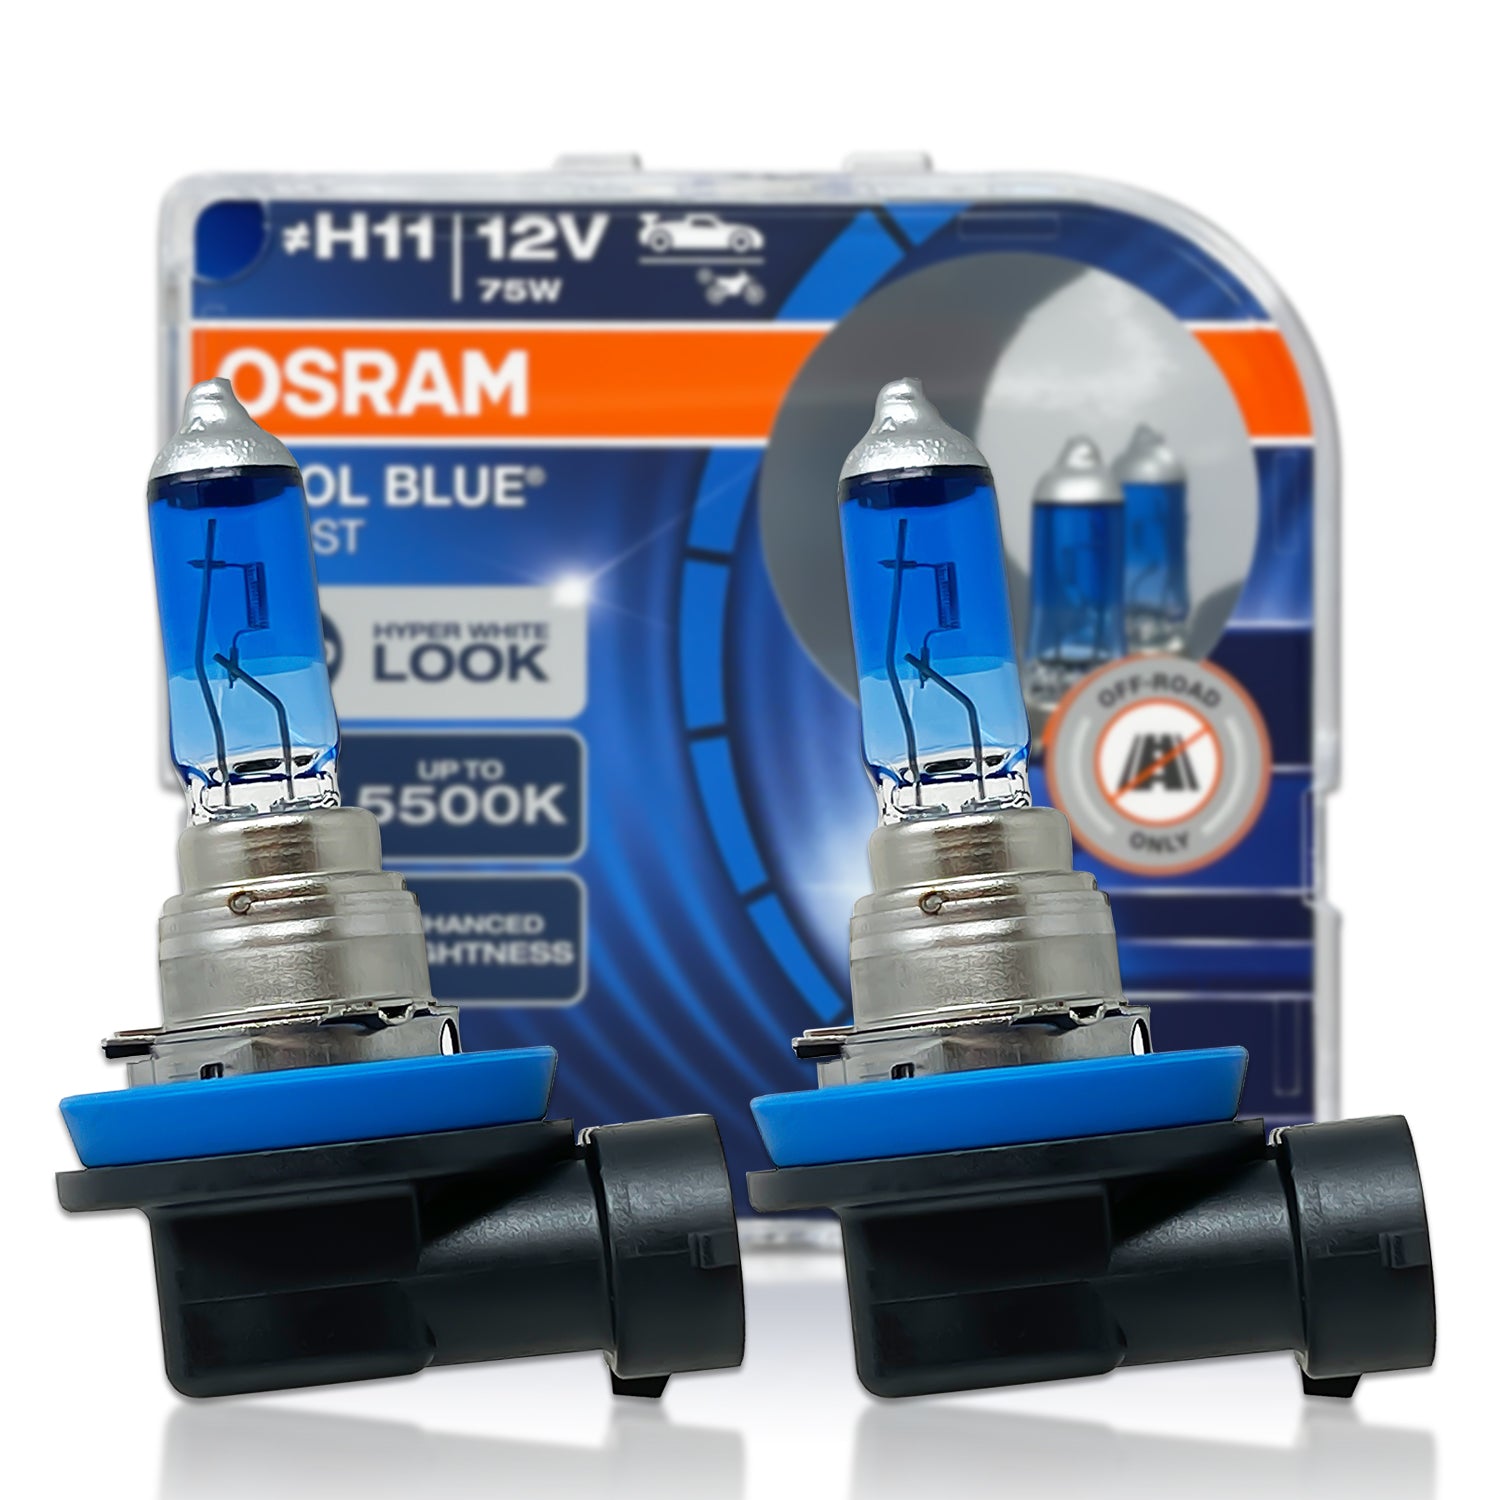 OSRAM COOL BLUE INTENSE H4, +100% more brightness, up to 5,000K, halogen  headlight lamp, LED look, duo box (2 lamps)